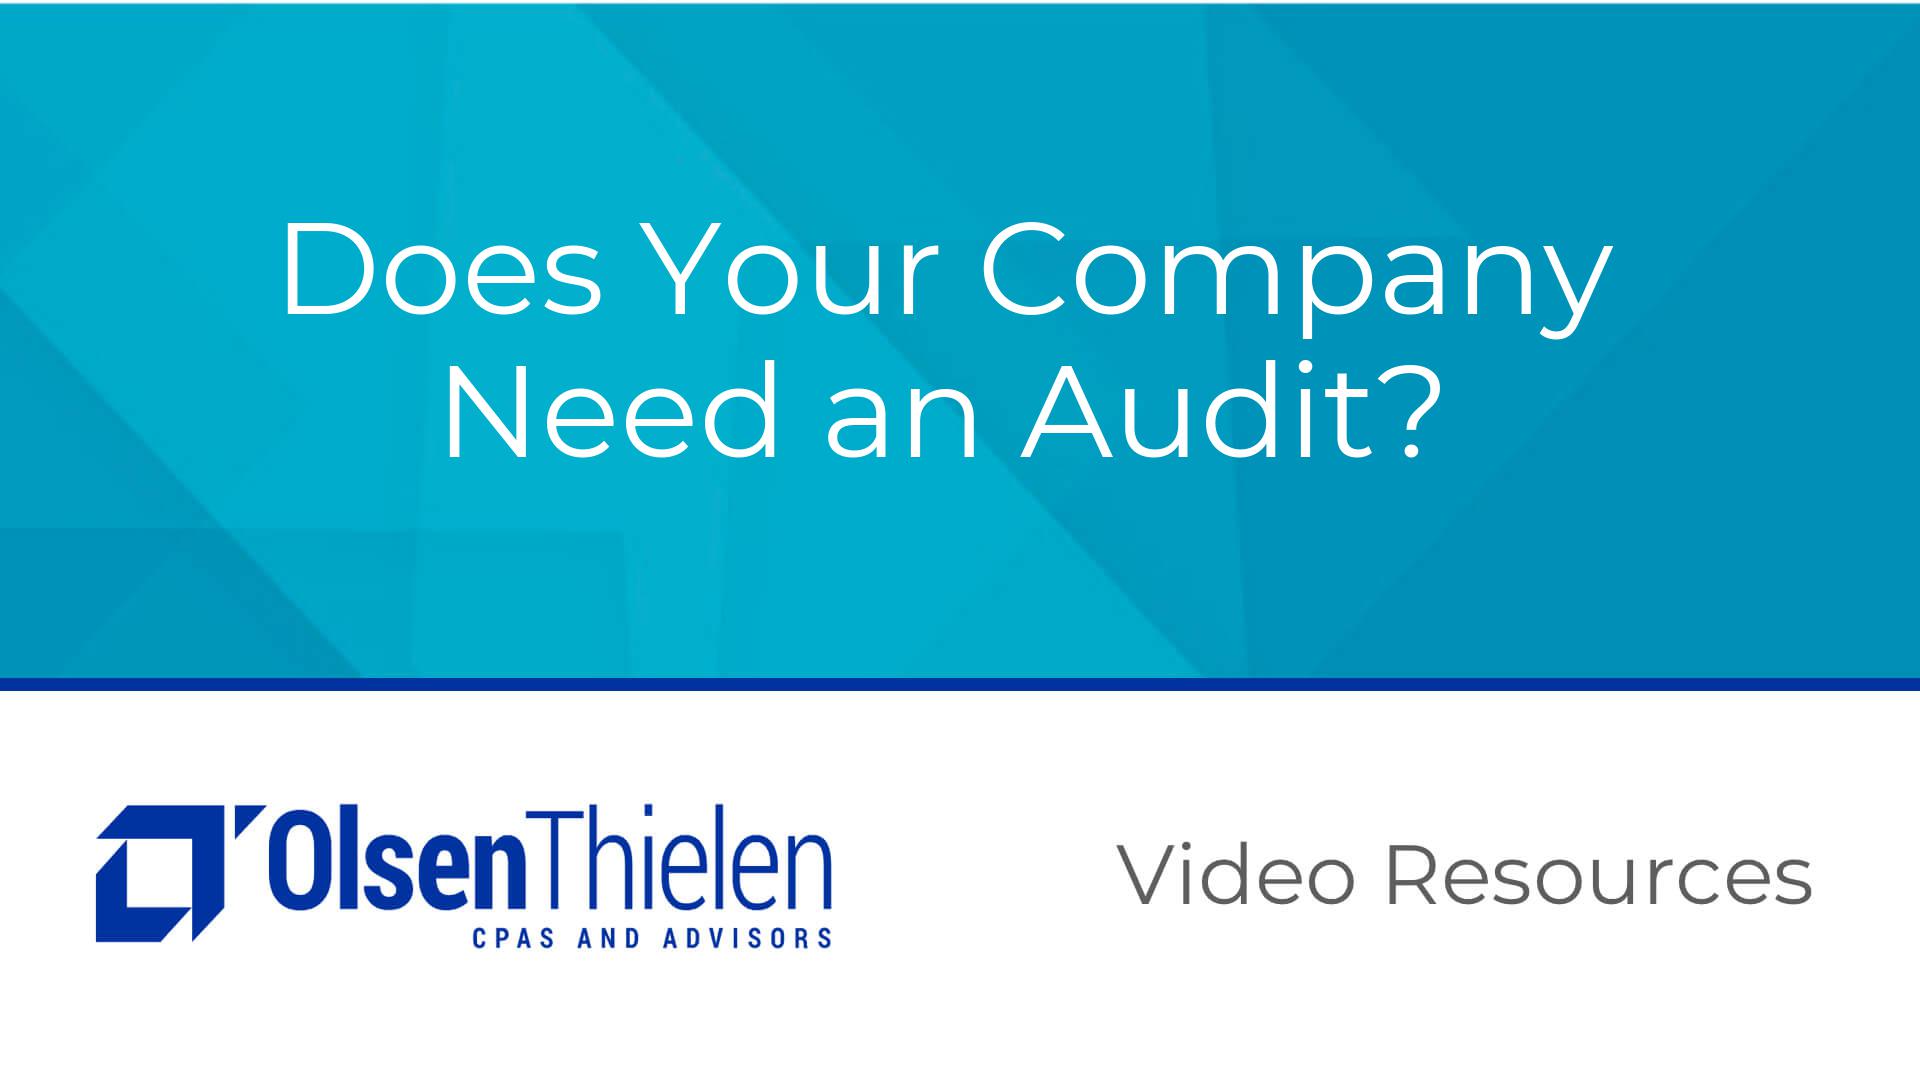 Does Your Company Need an Audit?